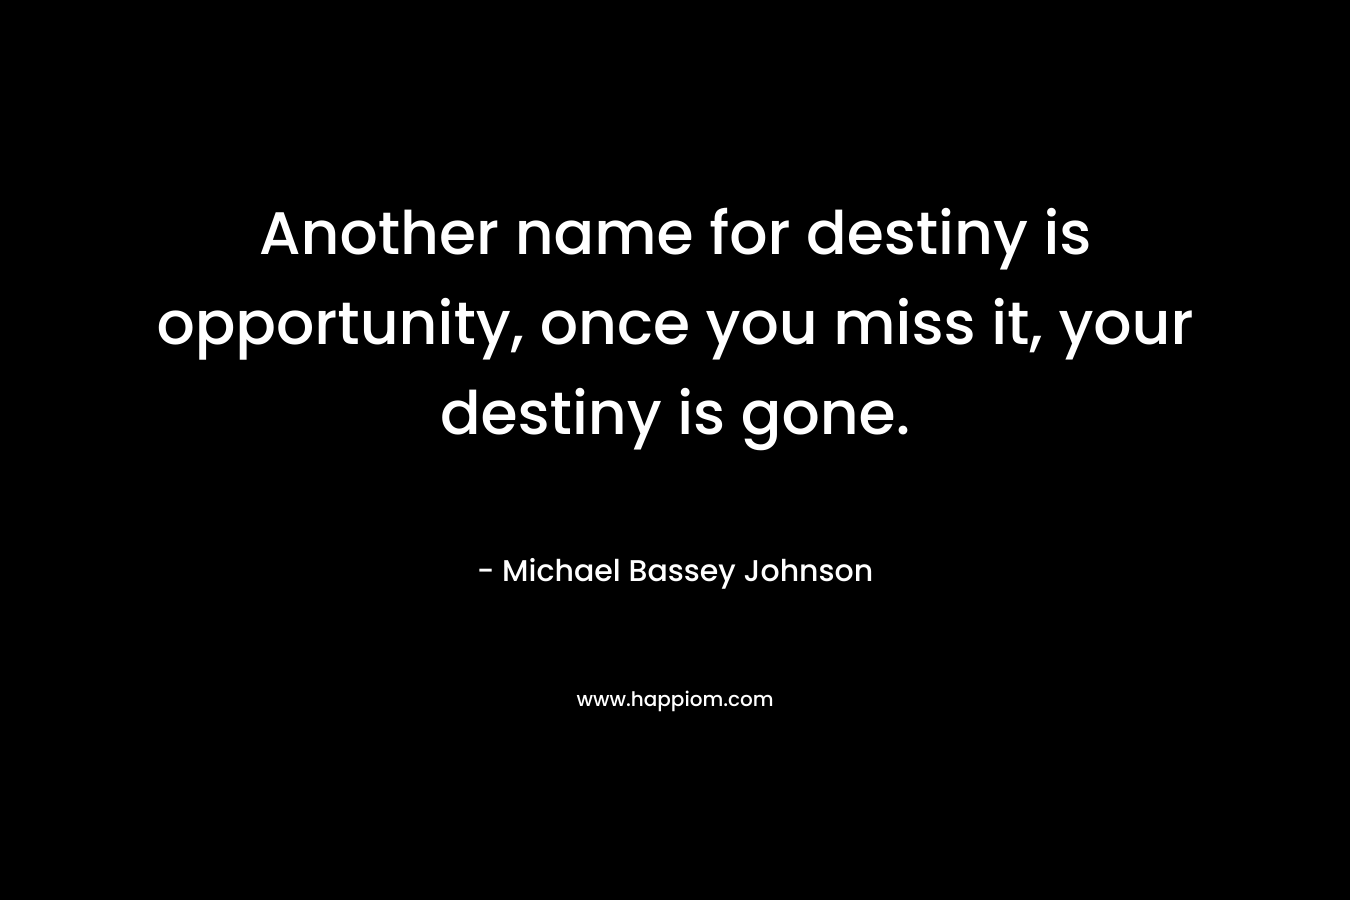 Another name for destiny is opportunity, once you miss it, your destiny is gone.